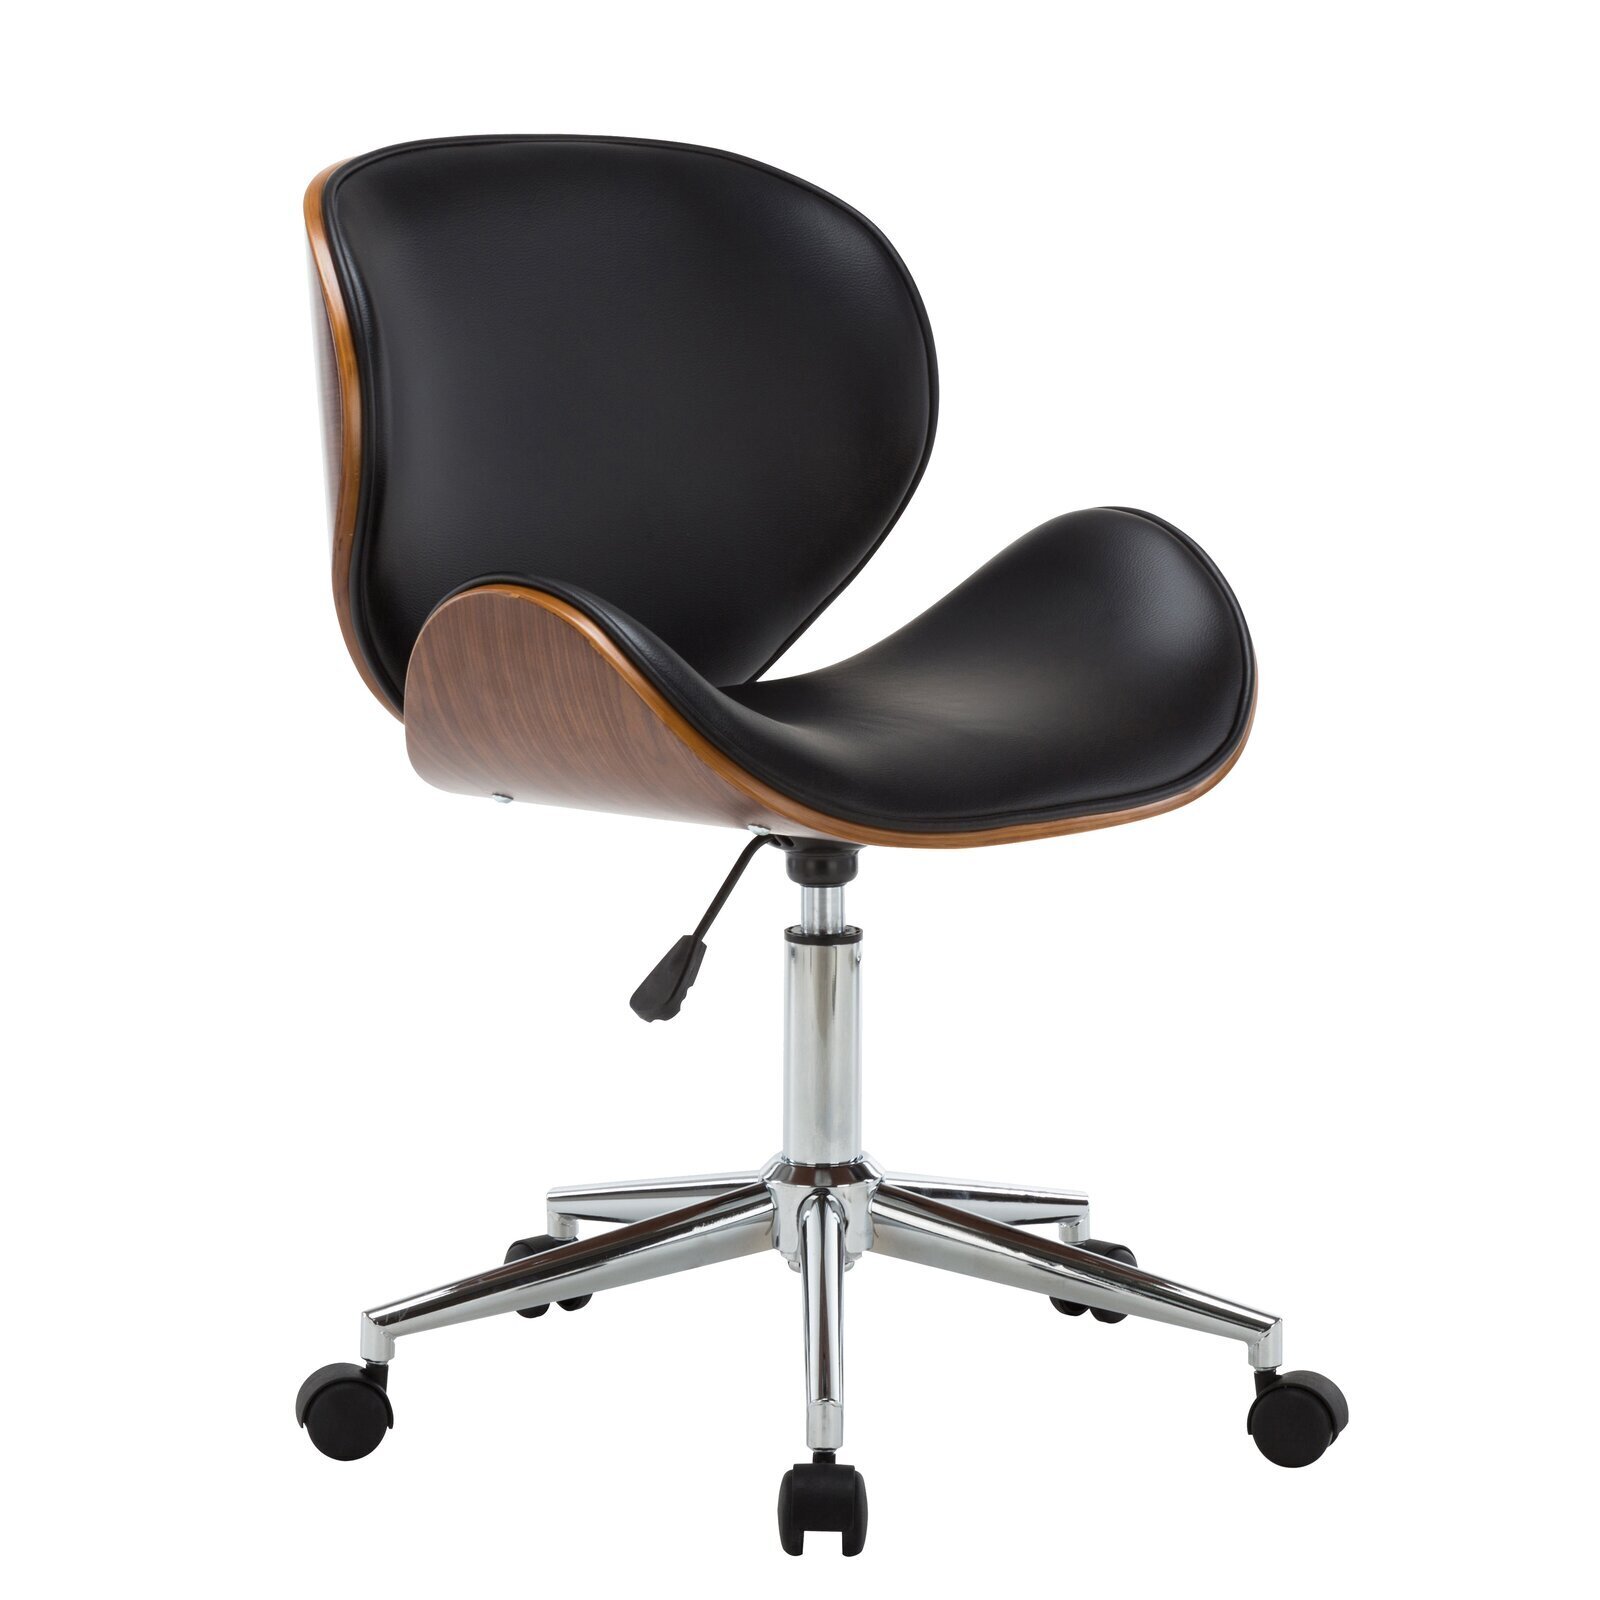 Eames caster dining chairs